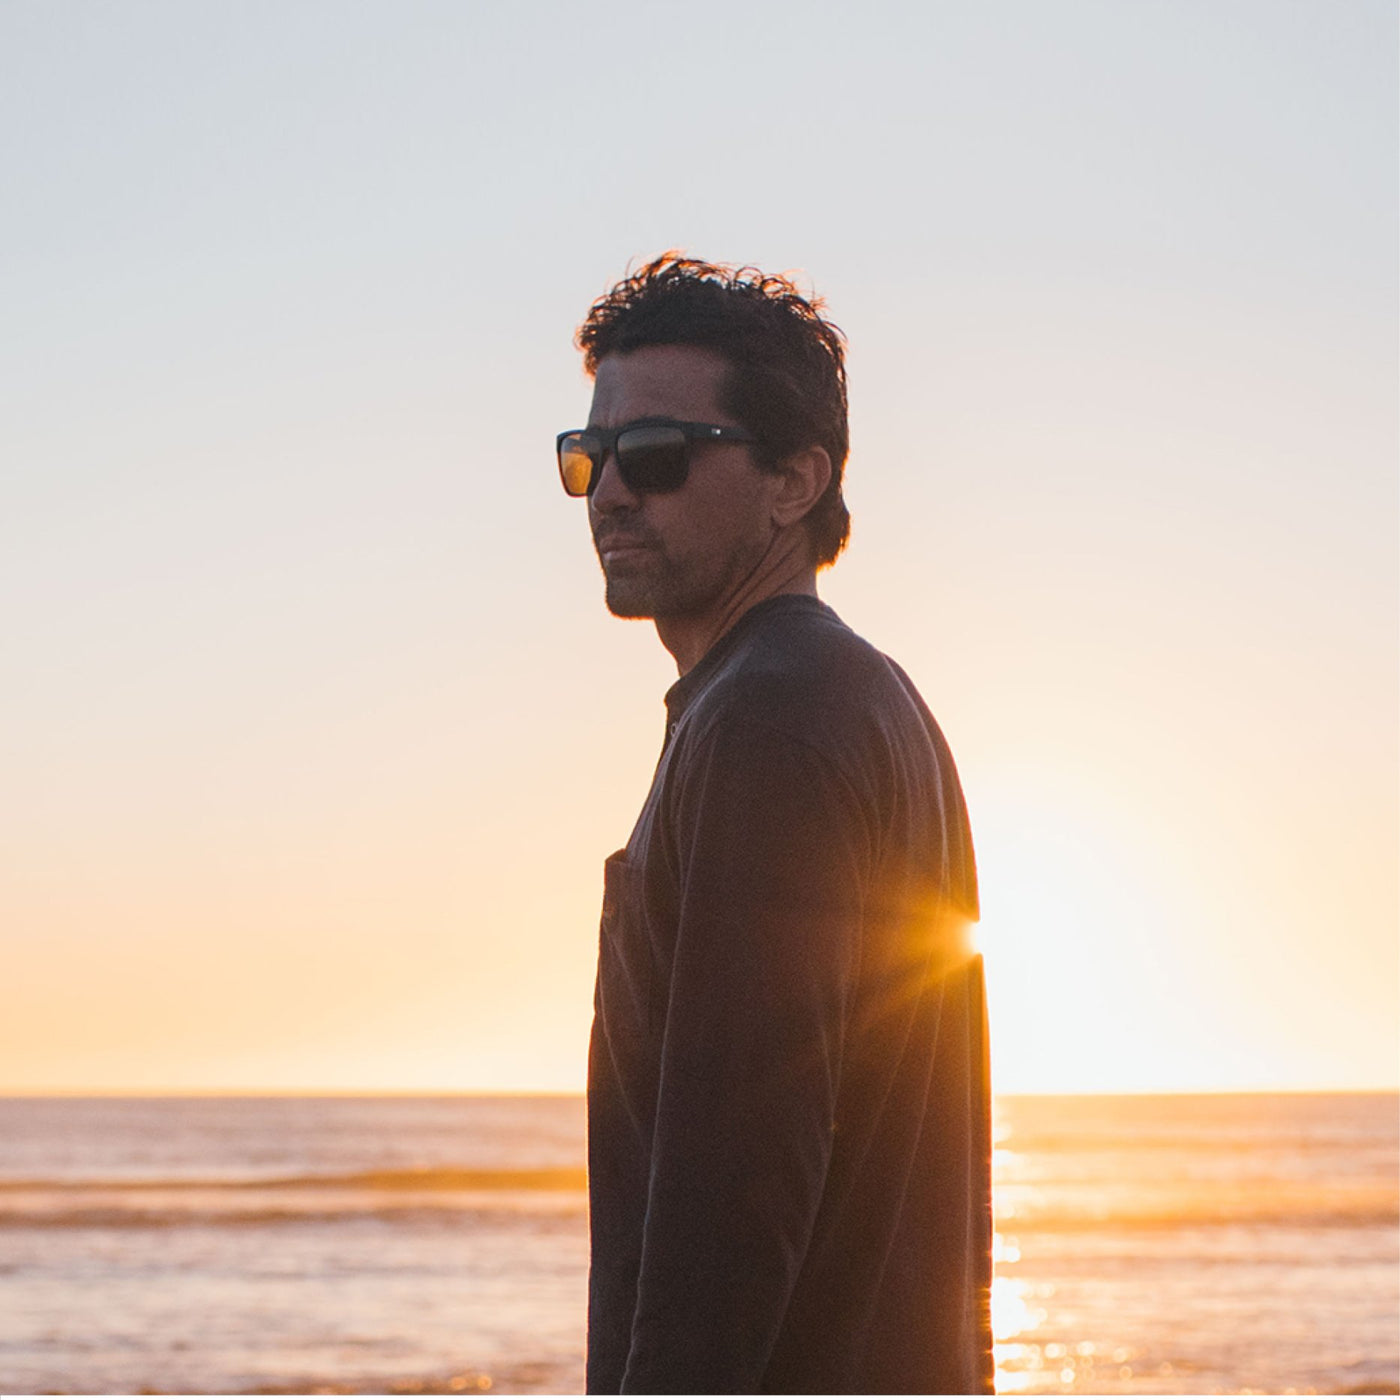 Greg Long standing in front of the ocean at sunset wearing black sunglasses